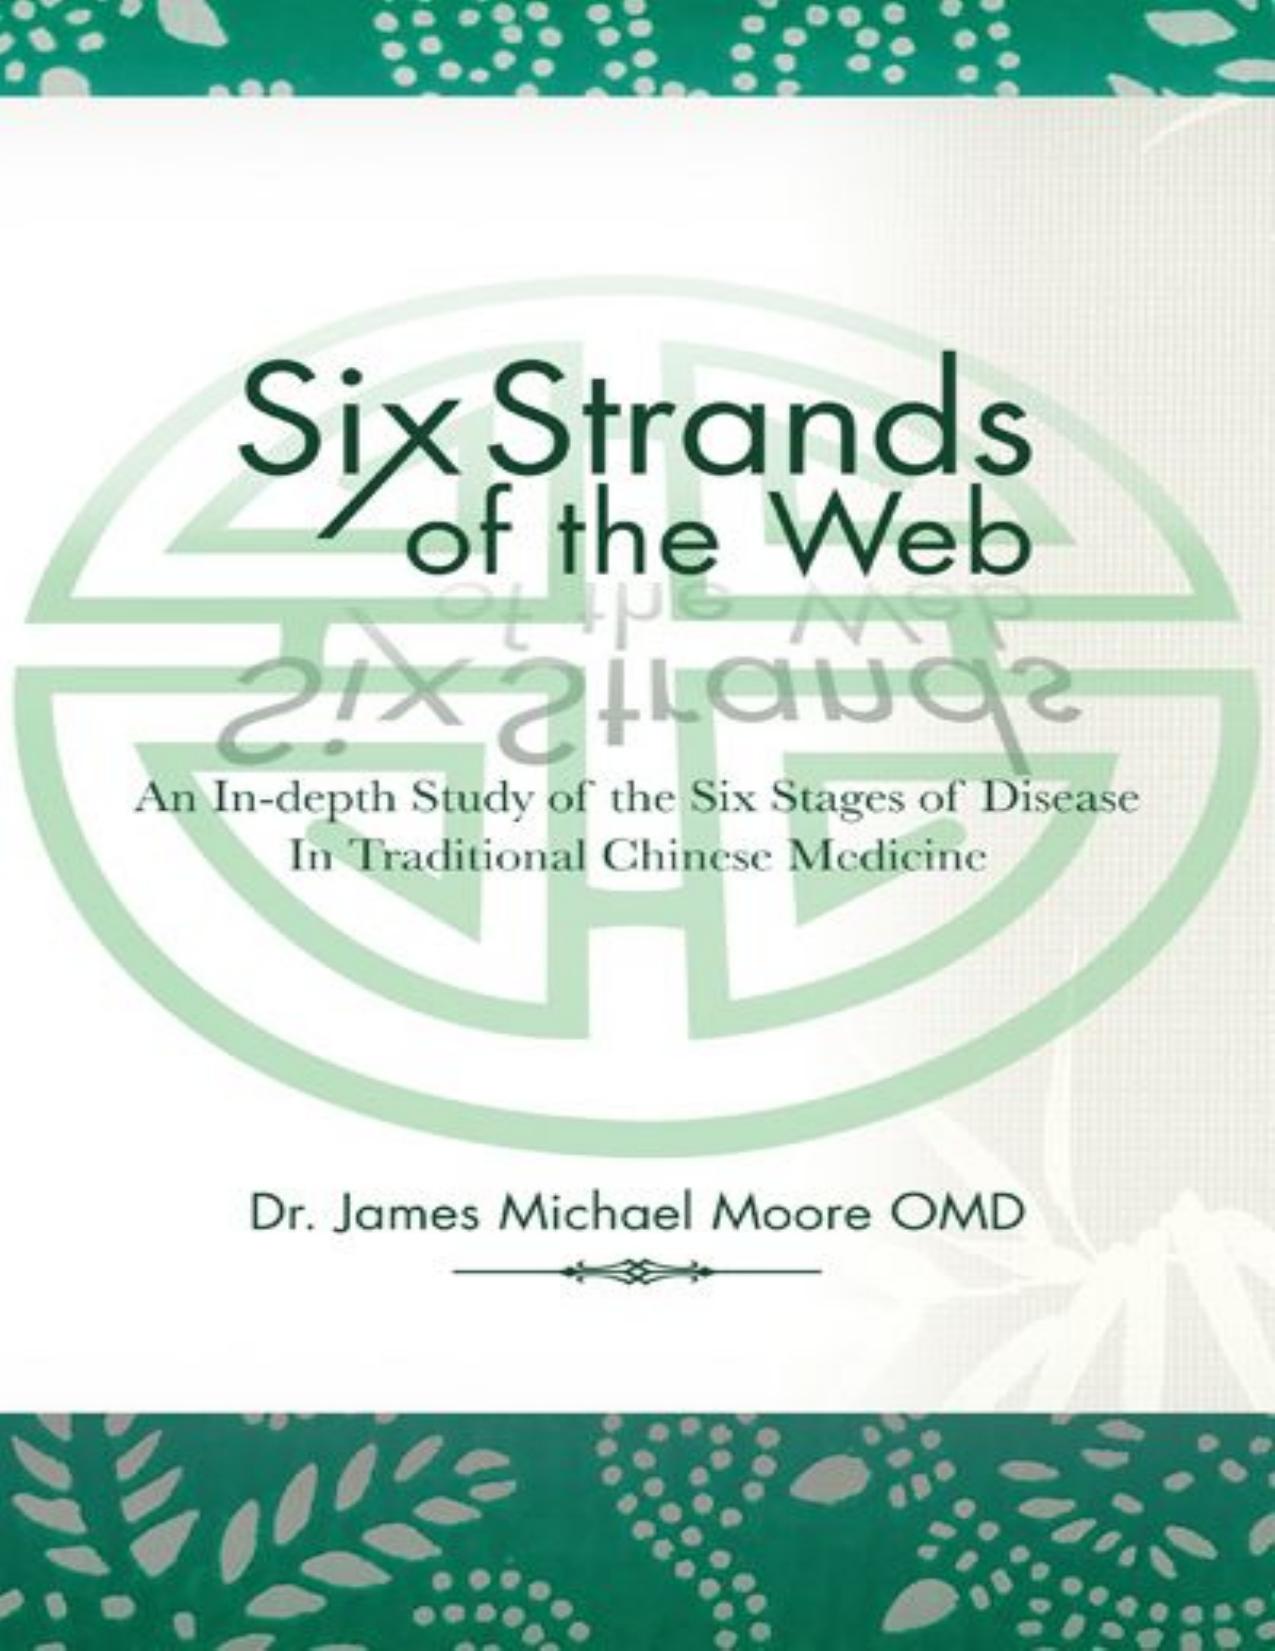 Six Strands of the Web: An In-depth Study of the Six Stages of Disease In Traditional Chinese Medicine by Dr. James Michael Moore